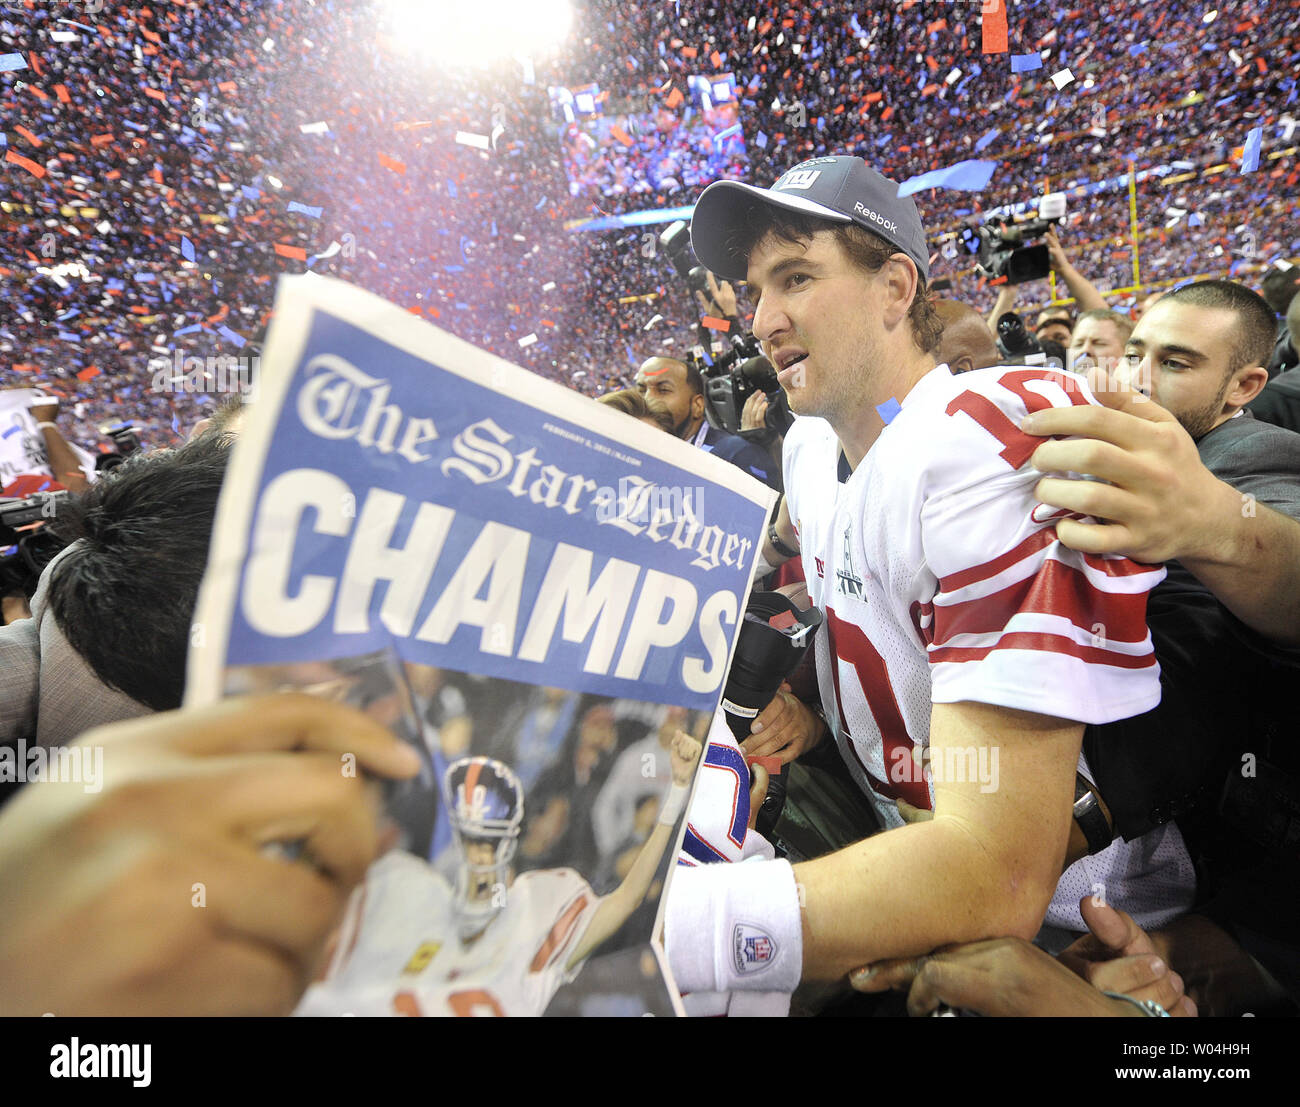 Confetti showers New York Giants quarterback Eli Manning at Super Bowl XLVI  at Lucas Oil Stadium on February 5, 2012 in Indianapolis. New York beat New  England 21-17 to win Super Bowl